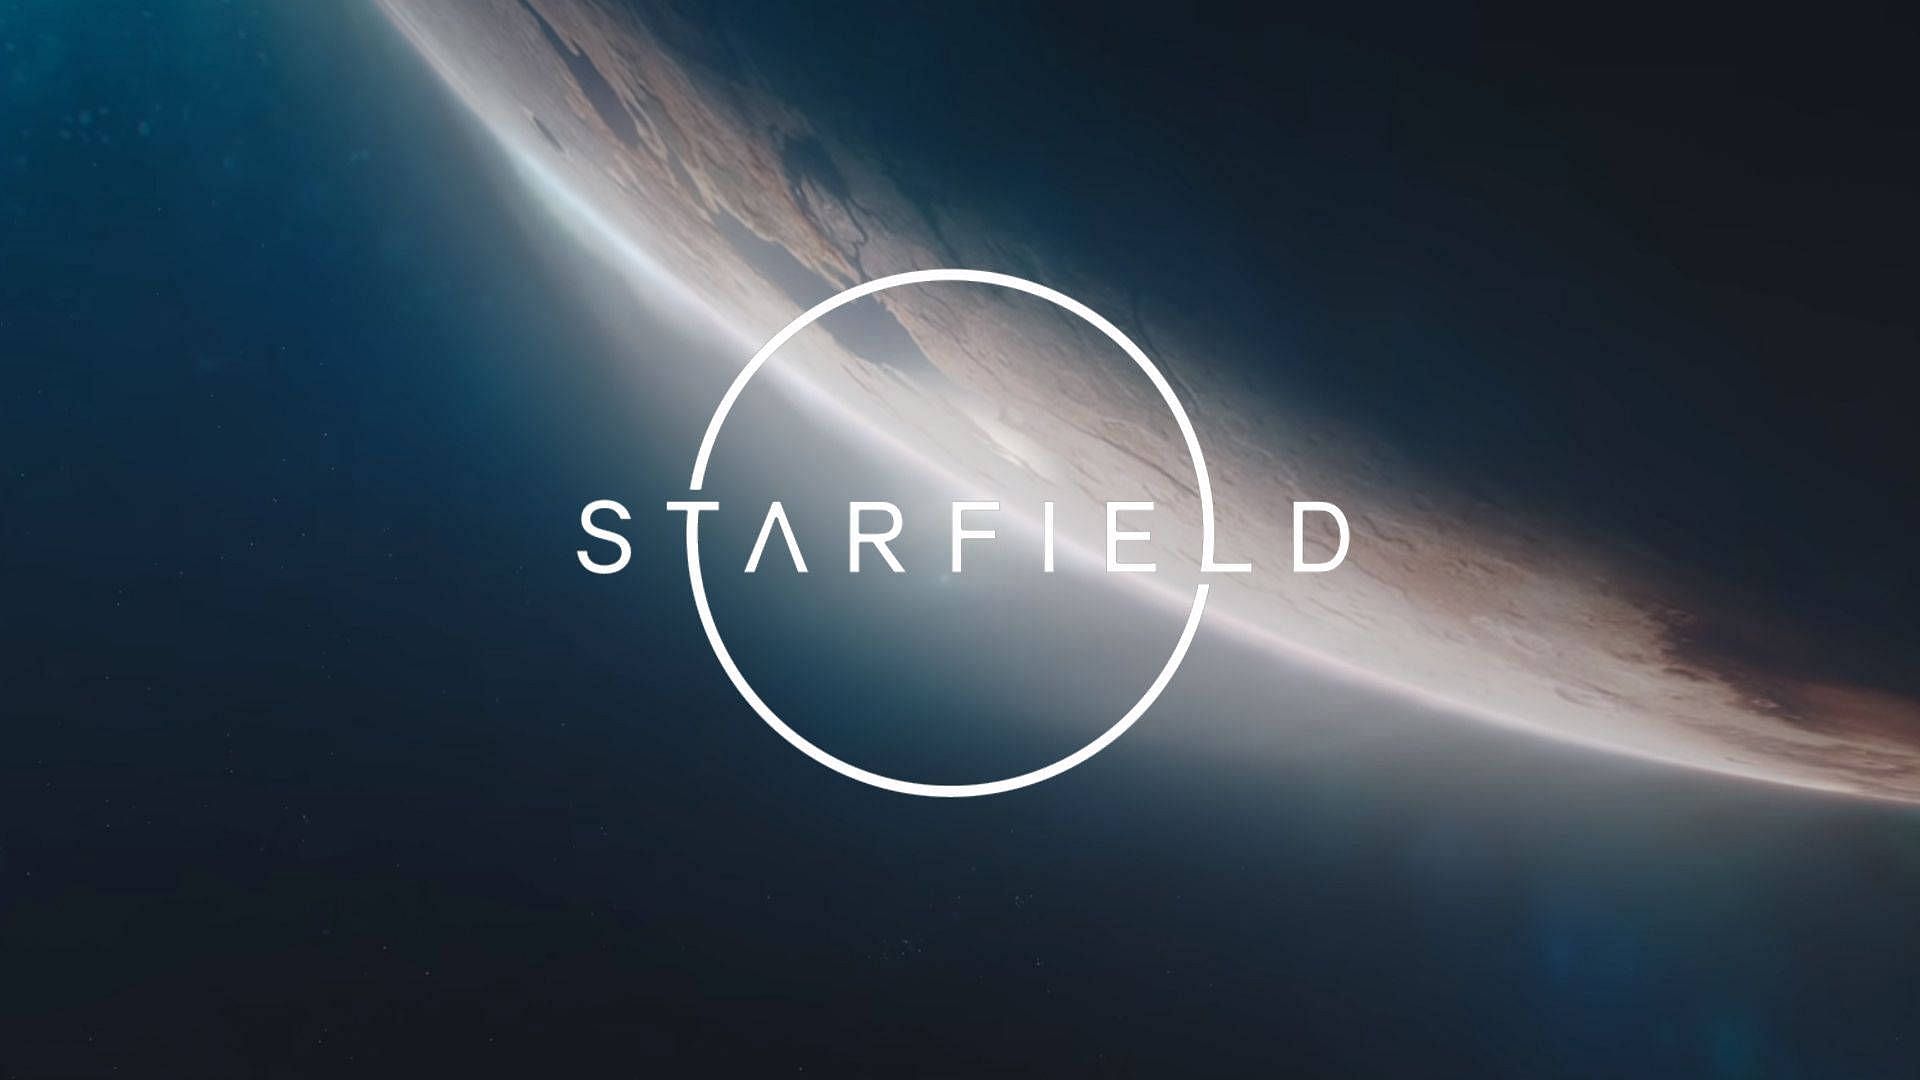 Starfield release date revealed at Xbox Games Showcase